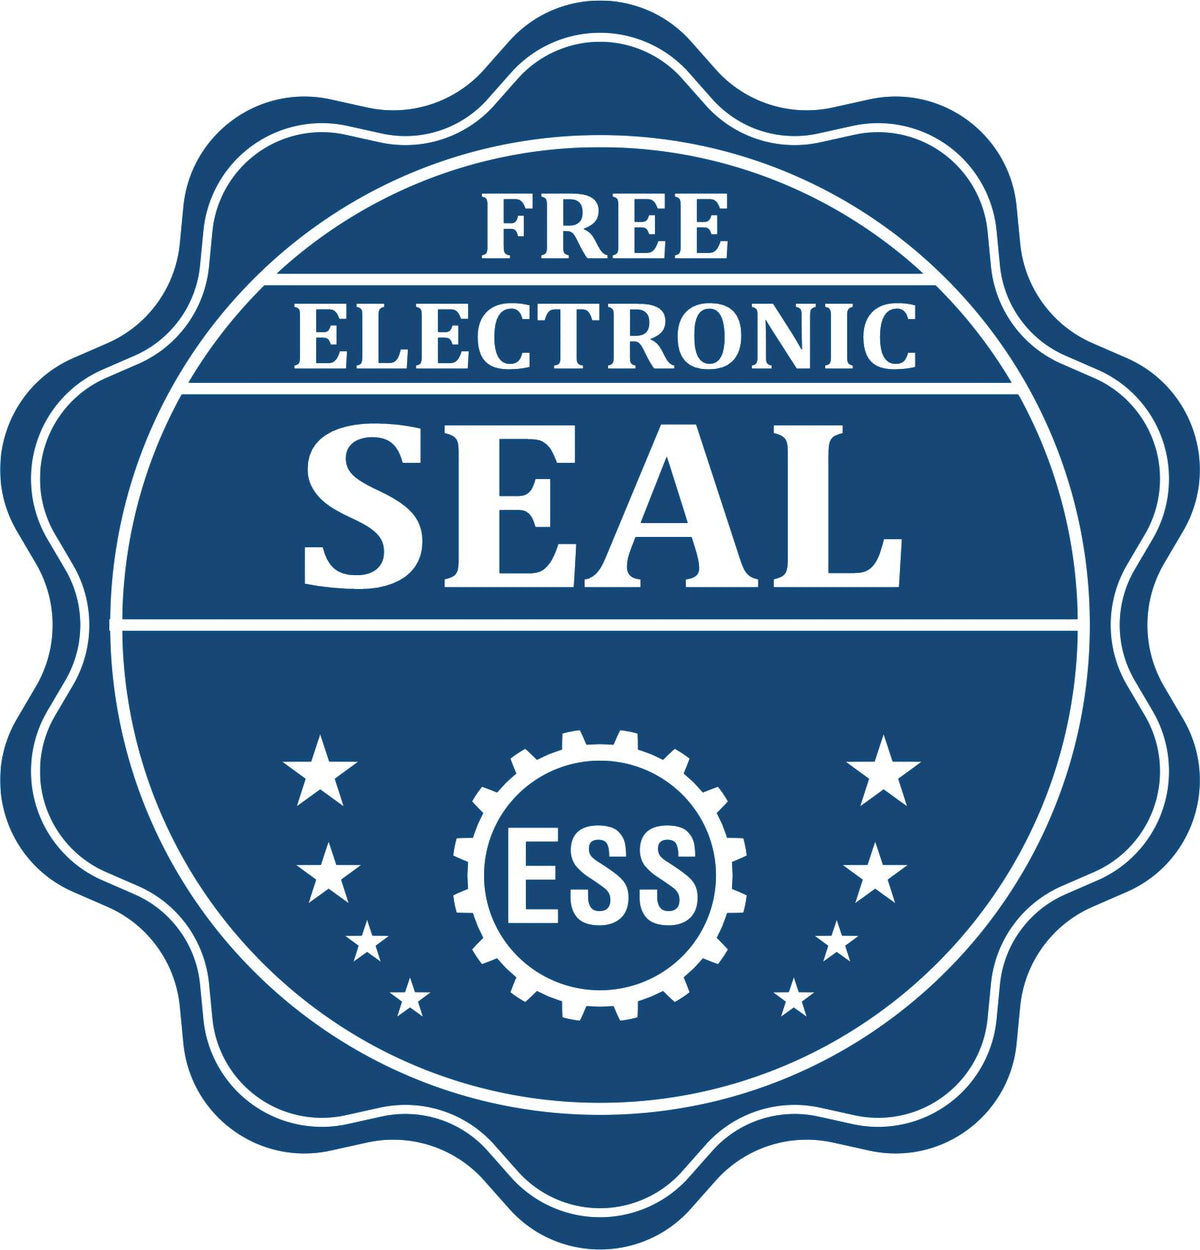 A badge showing a free electronic seal for the Slim Pre-Inked Maryland Land Surveyor Seal Stamp with stars and the ESS gear on the emblem.